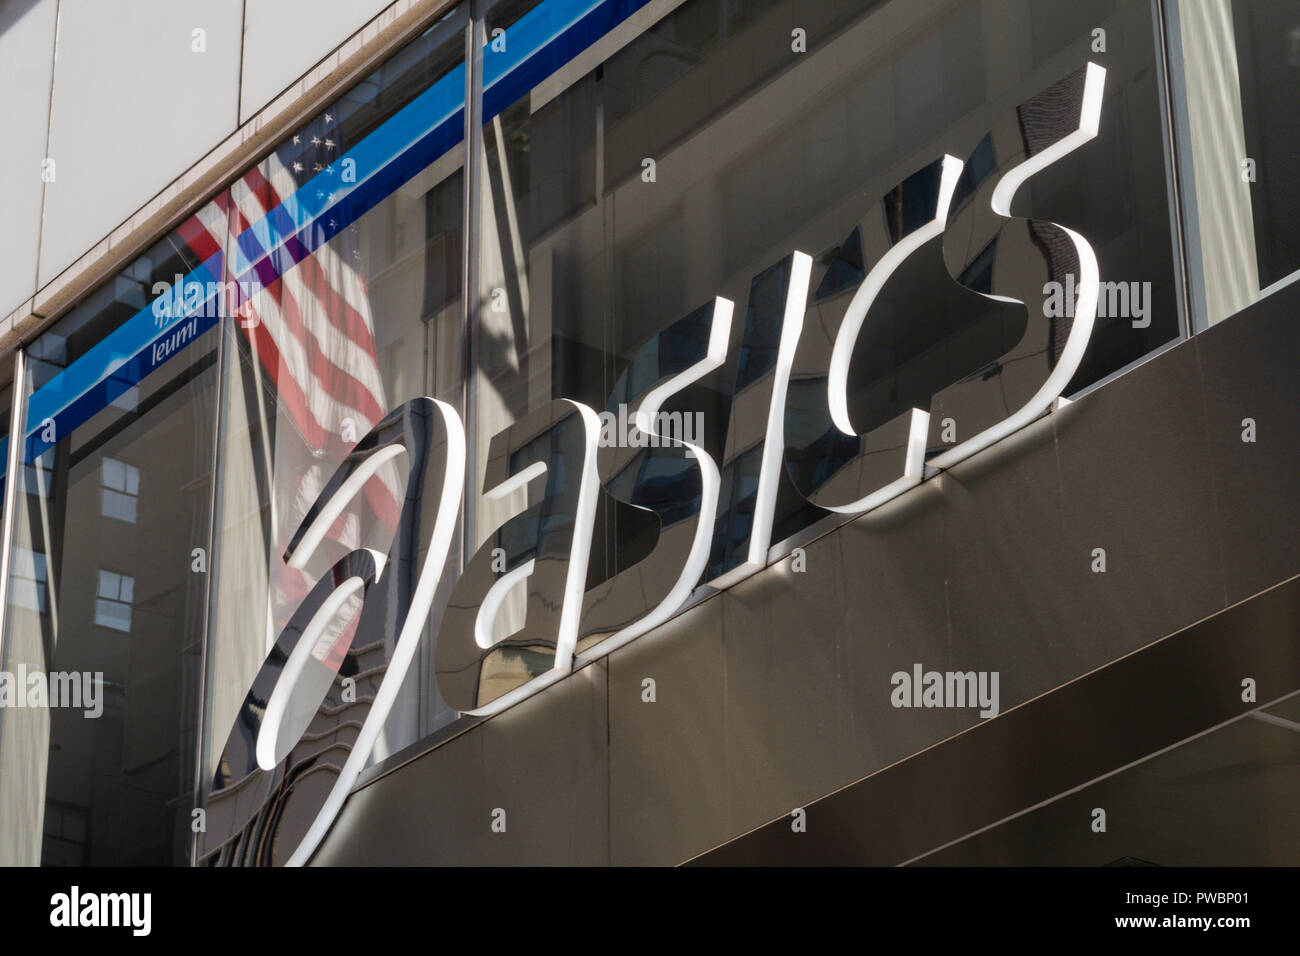 Asics Fifth Avenue flagship store sign, NYC, USA Stock Photo - Alamy